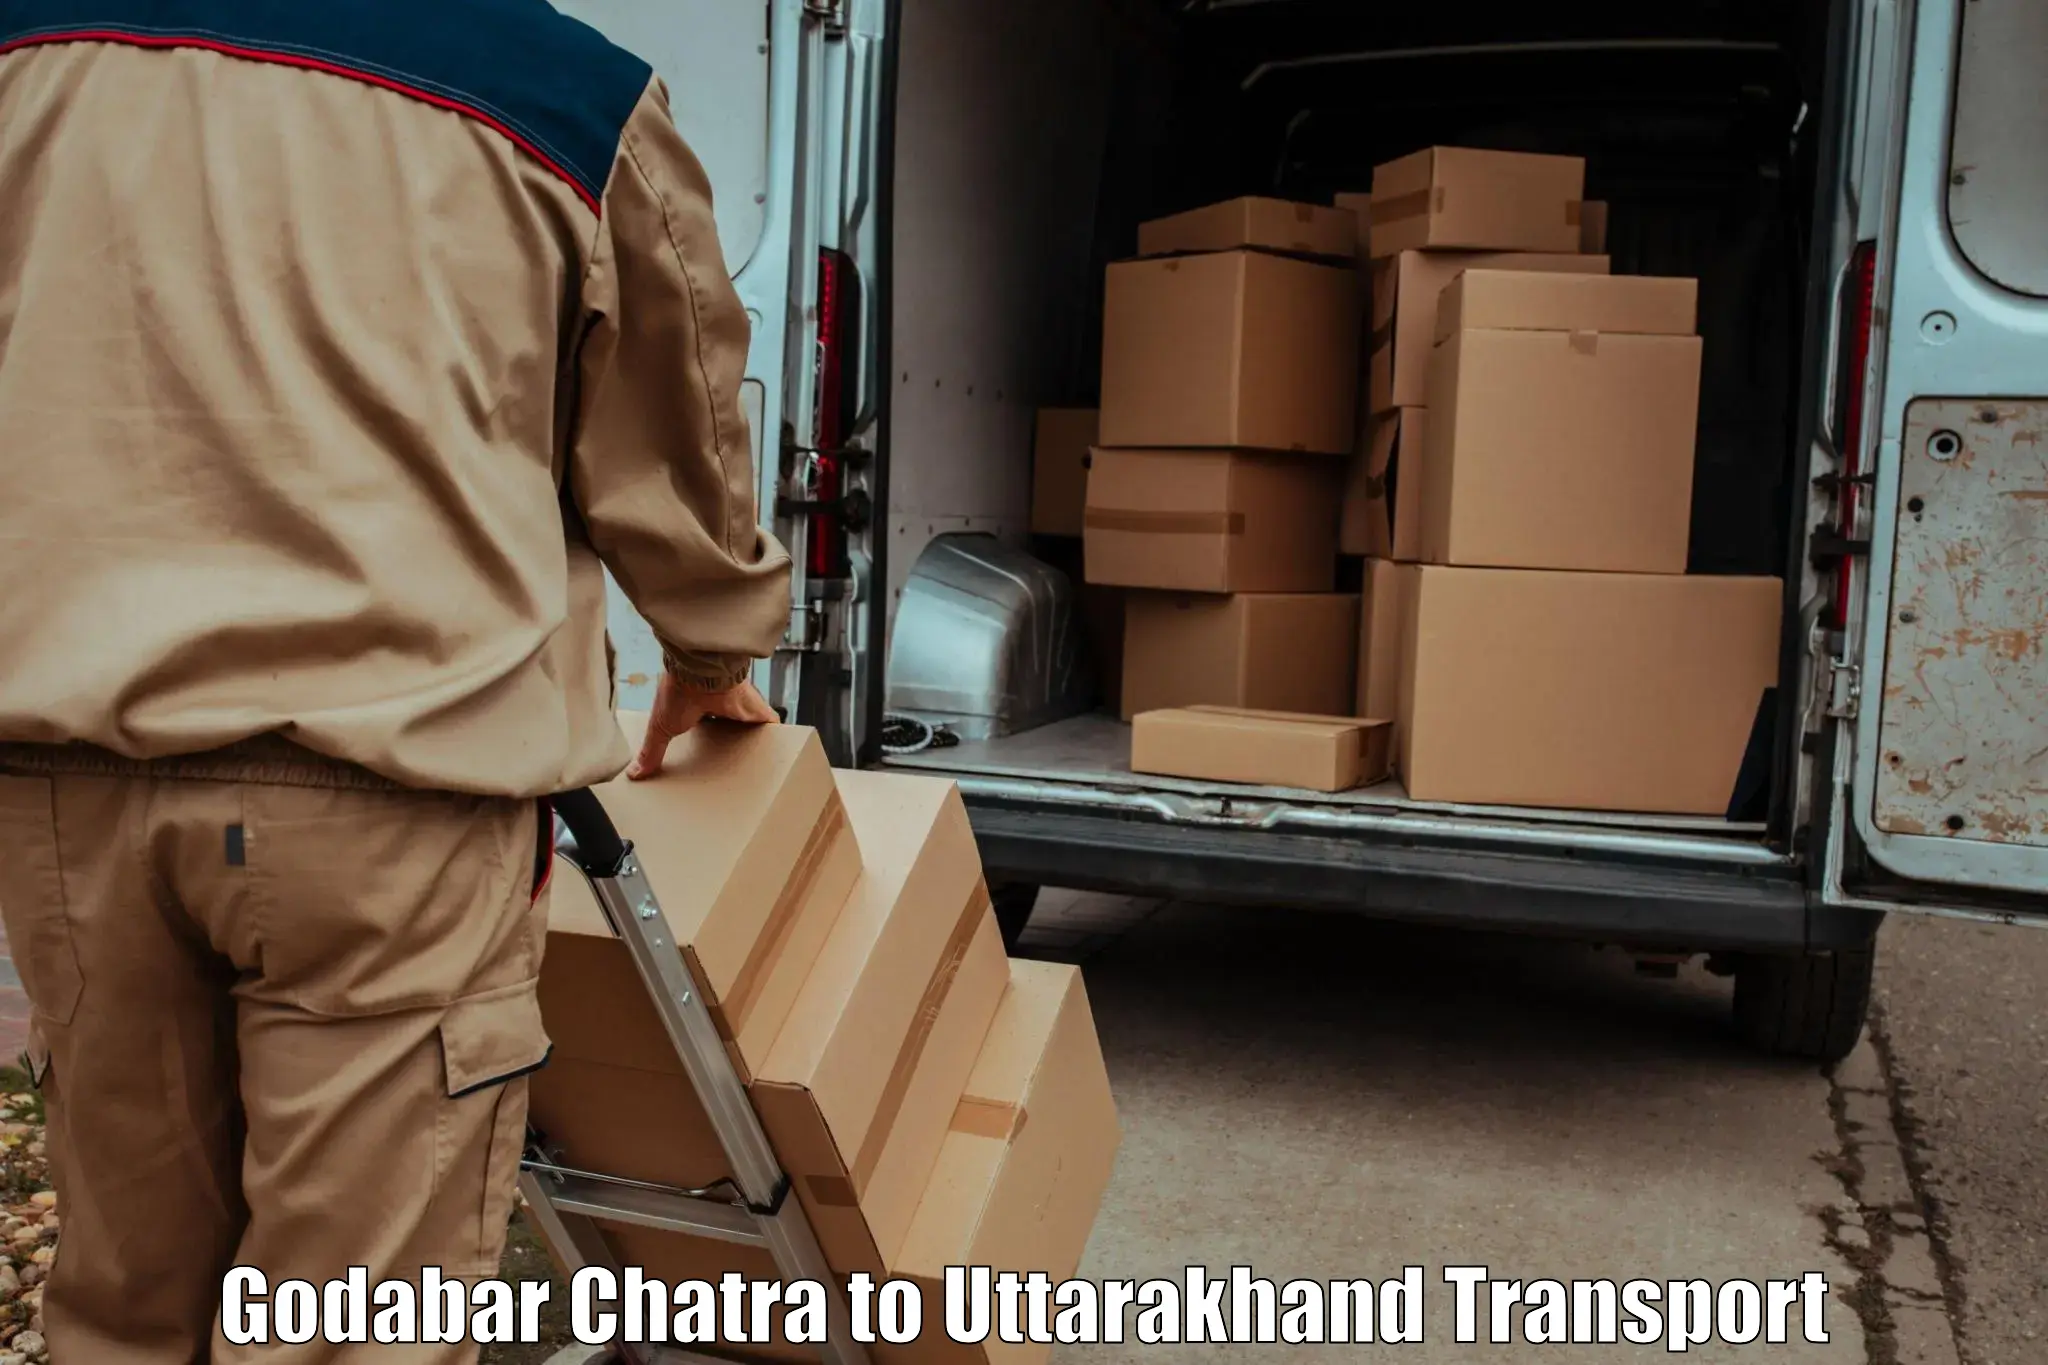 Daily transport service Godabar Chatra to Roorkee